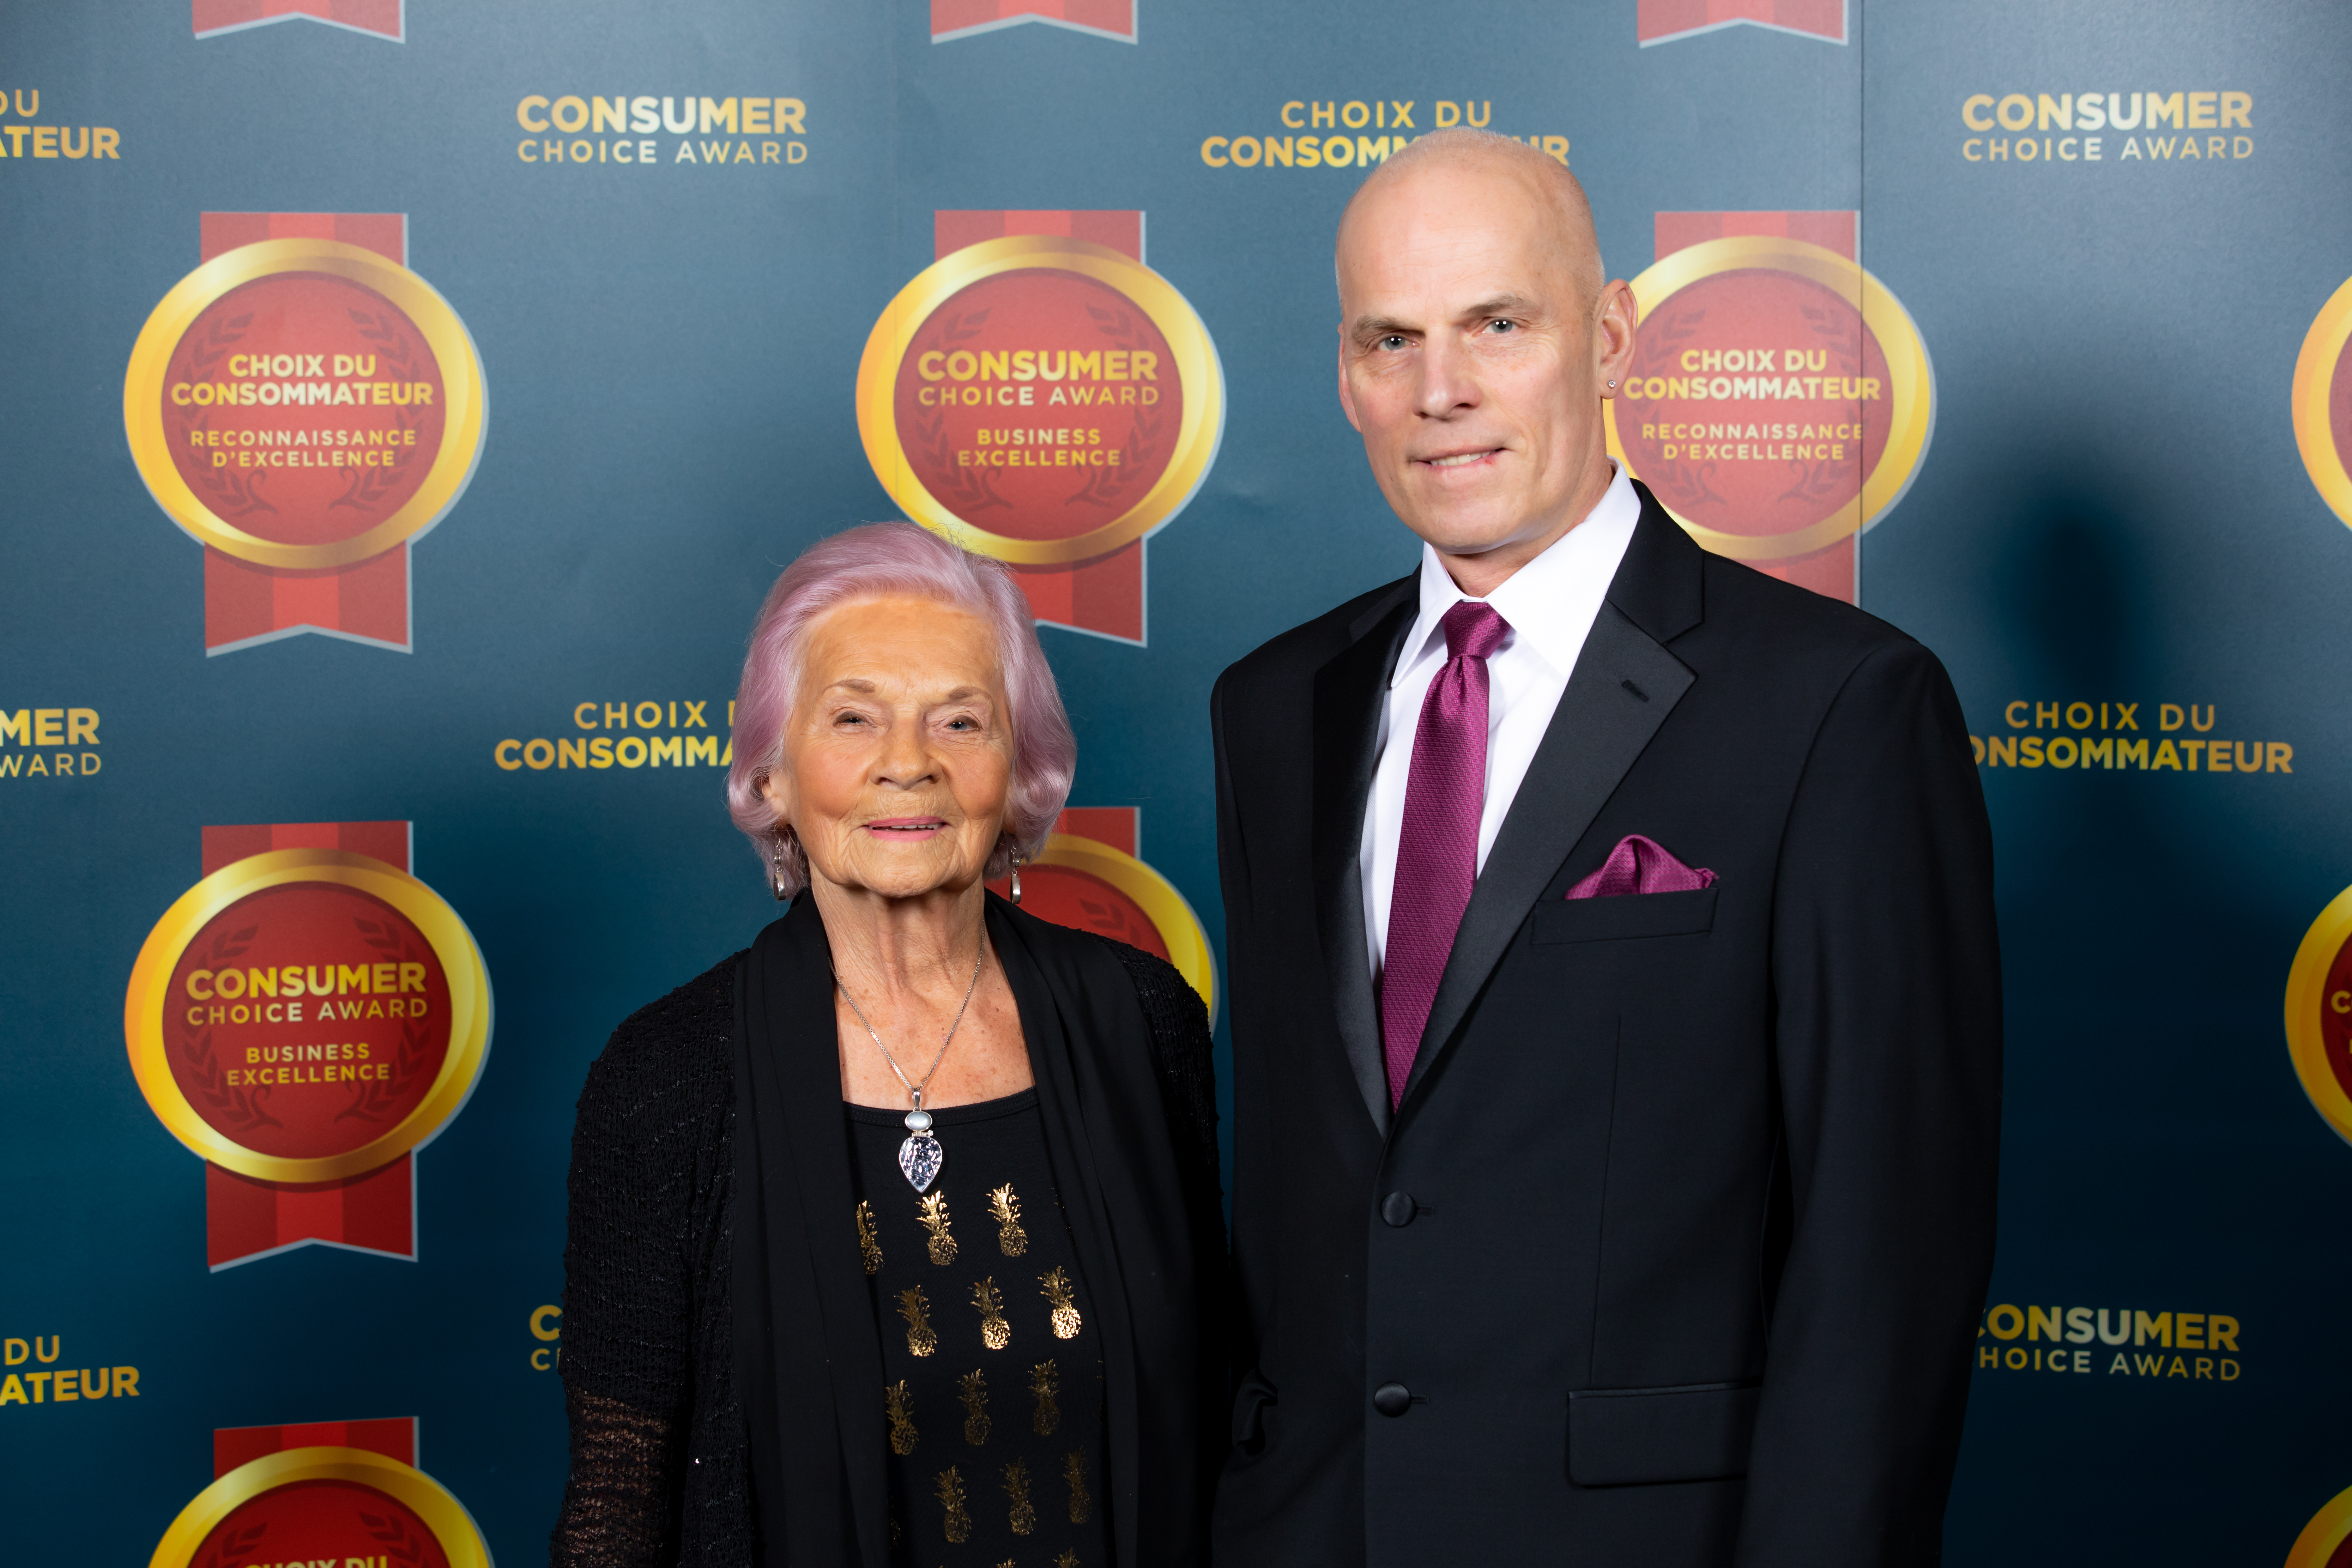 Consumer Choice Award, Tuesday, February 18, 2020, Press release picture